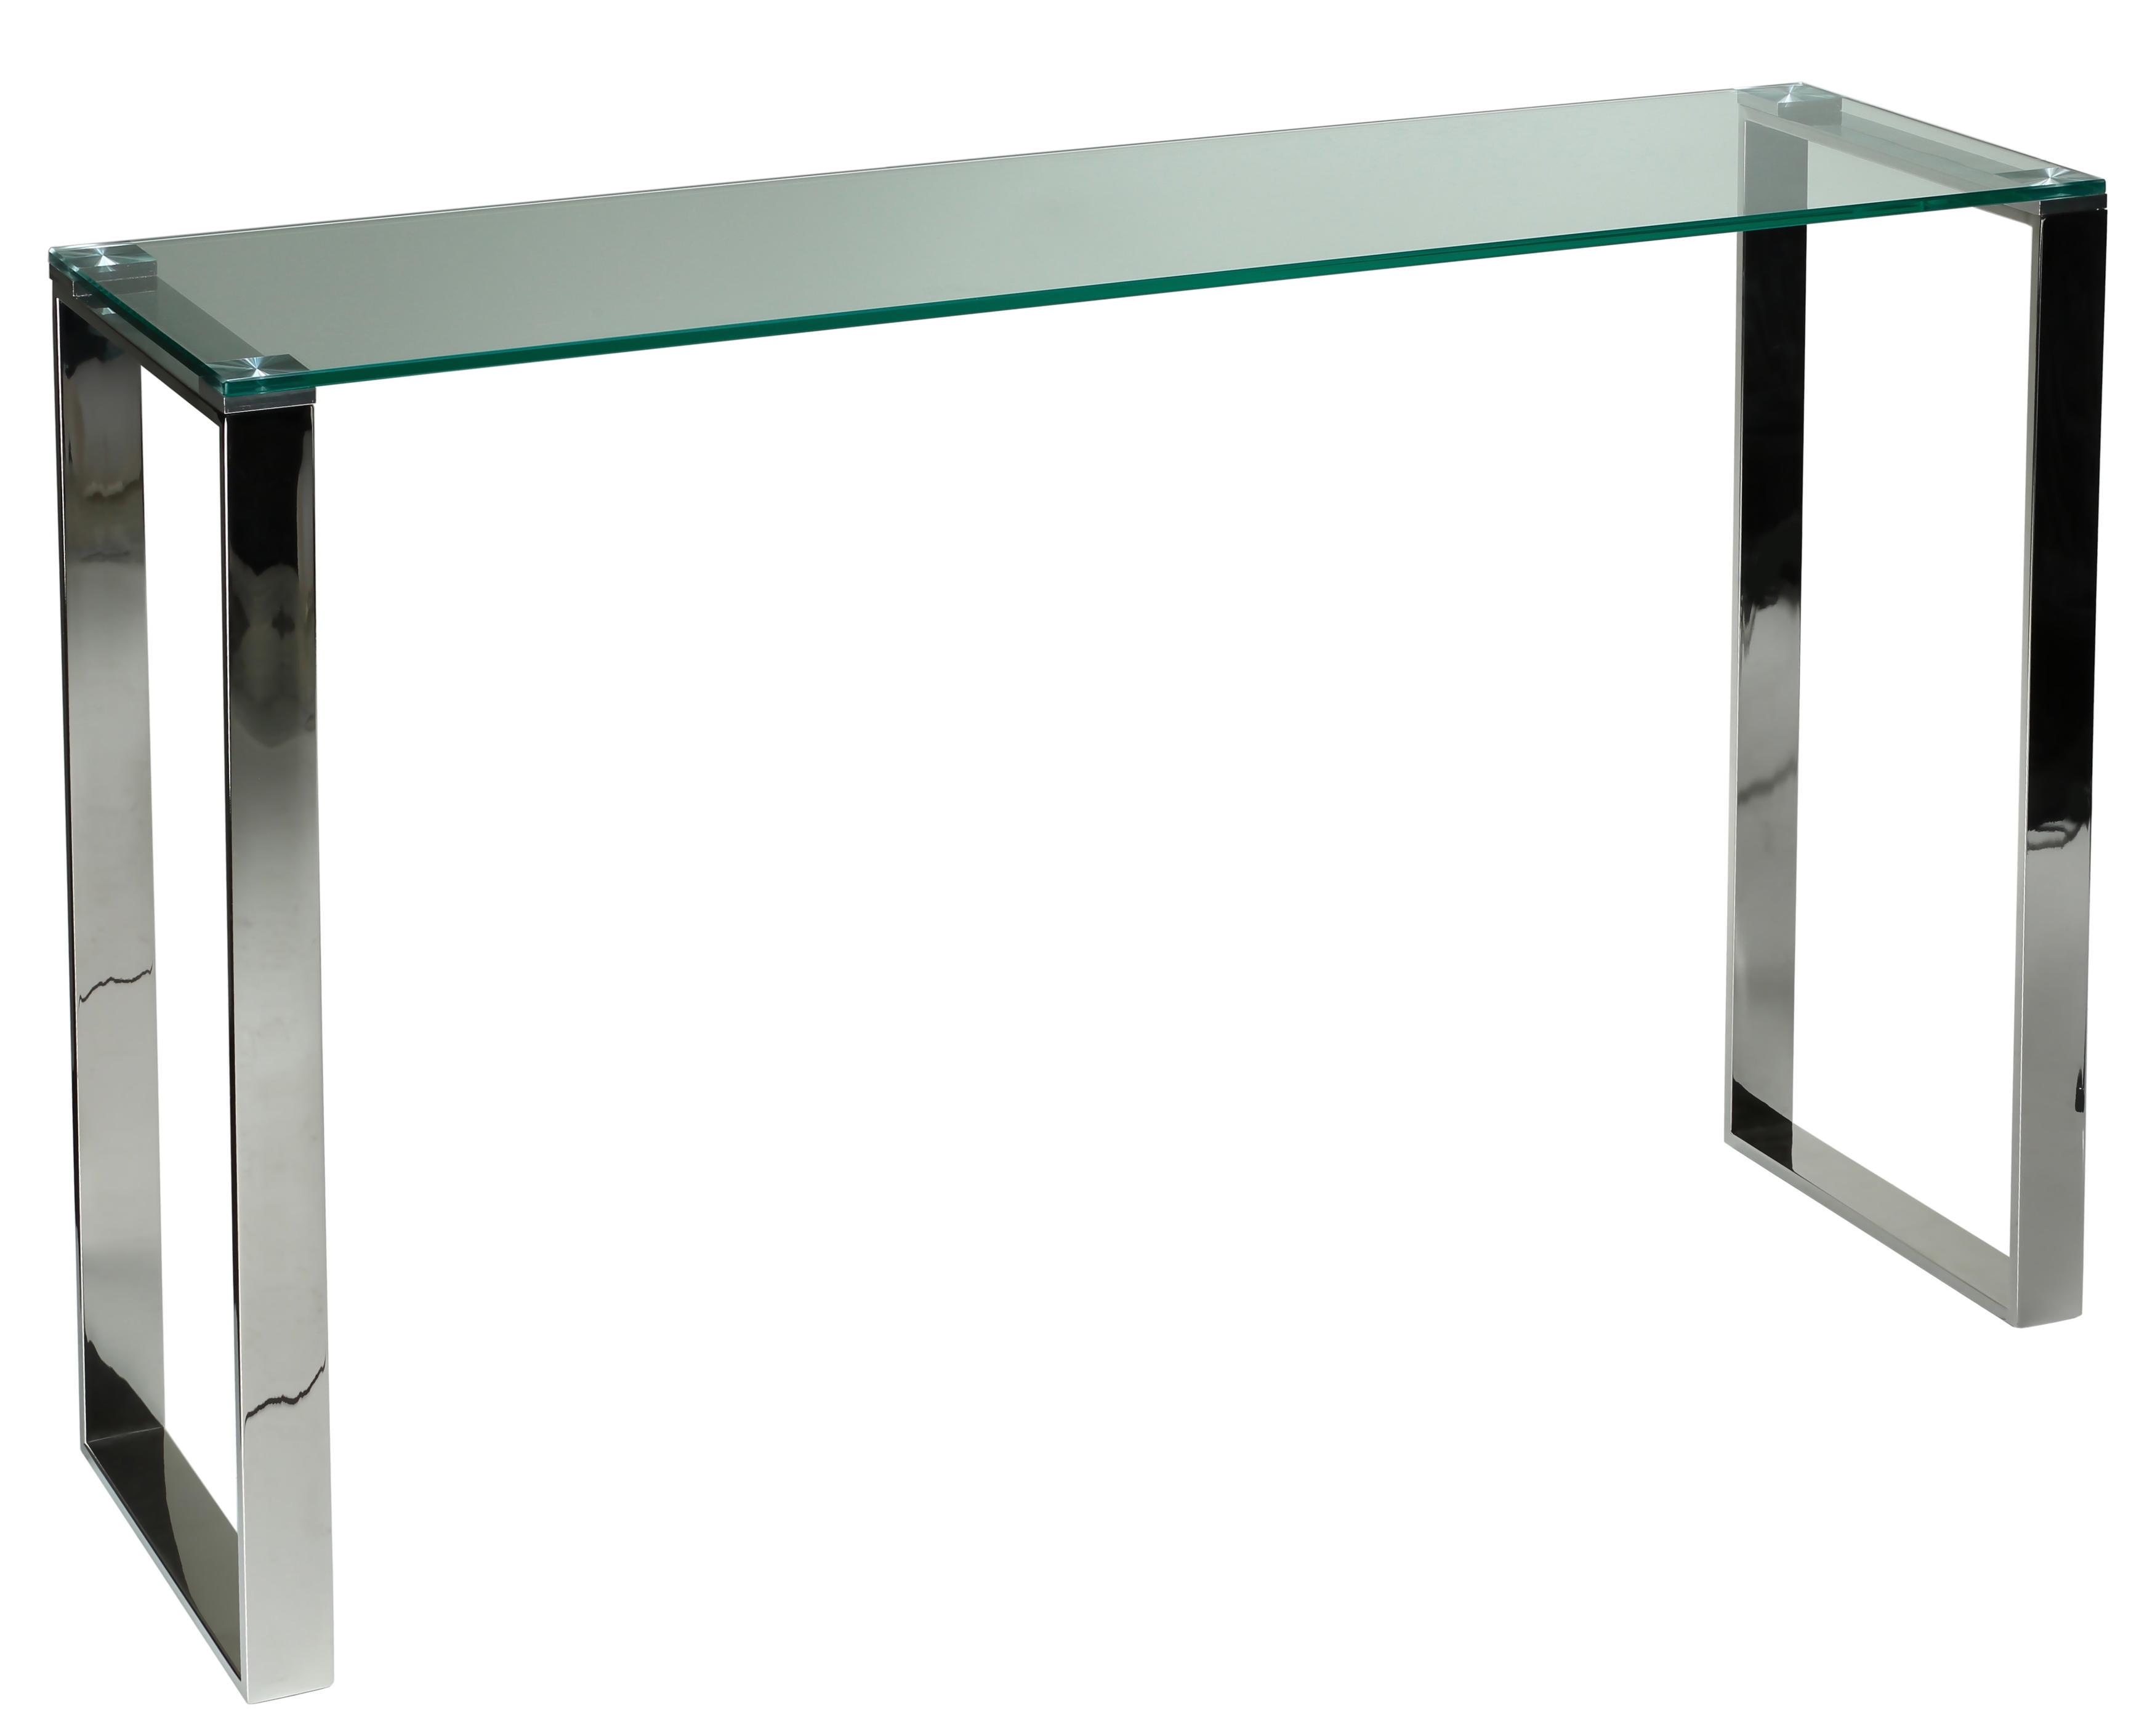 Sleek Chrome and Glass Console Table with Minimalist Storage